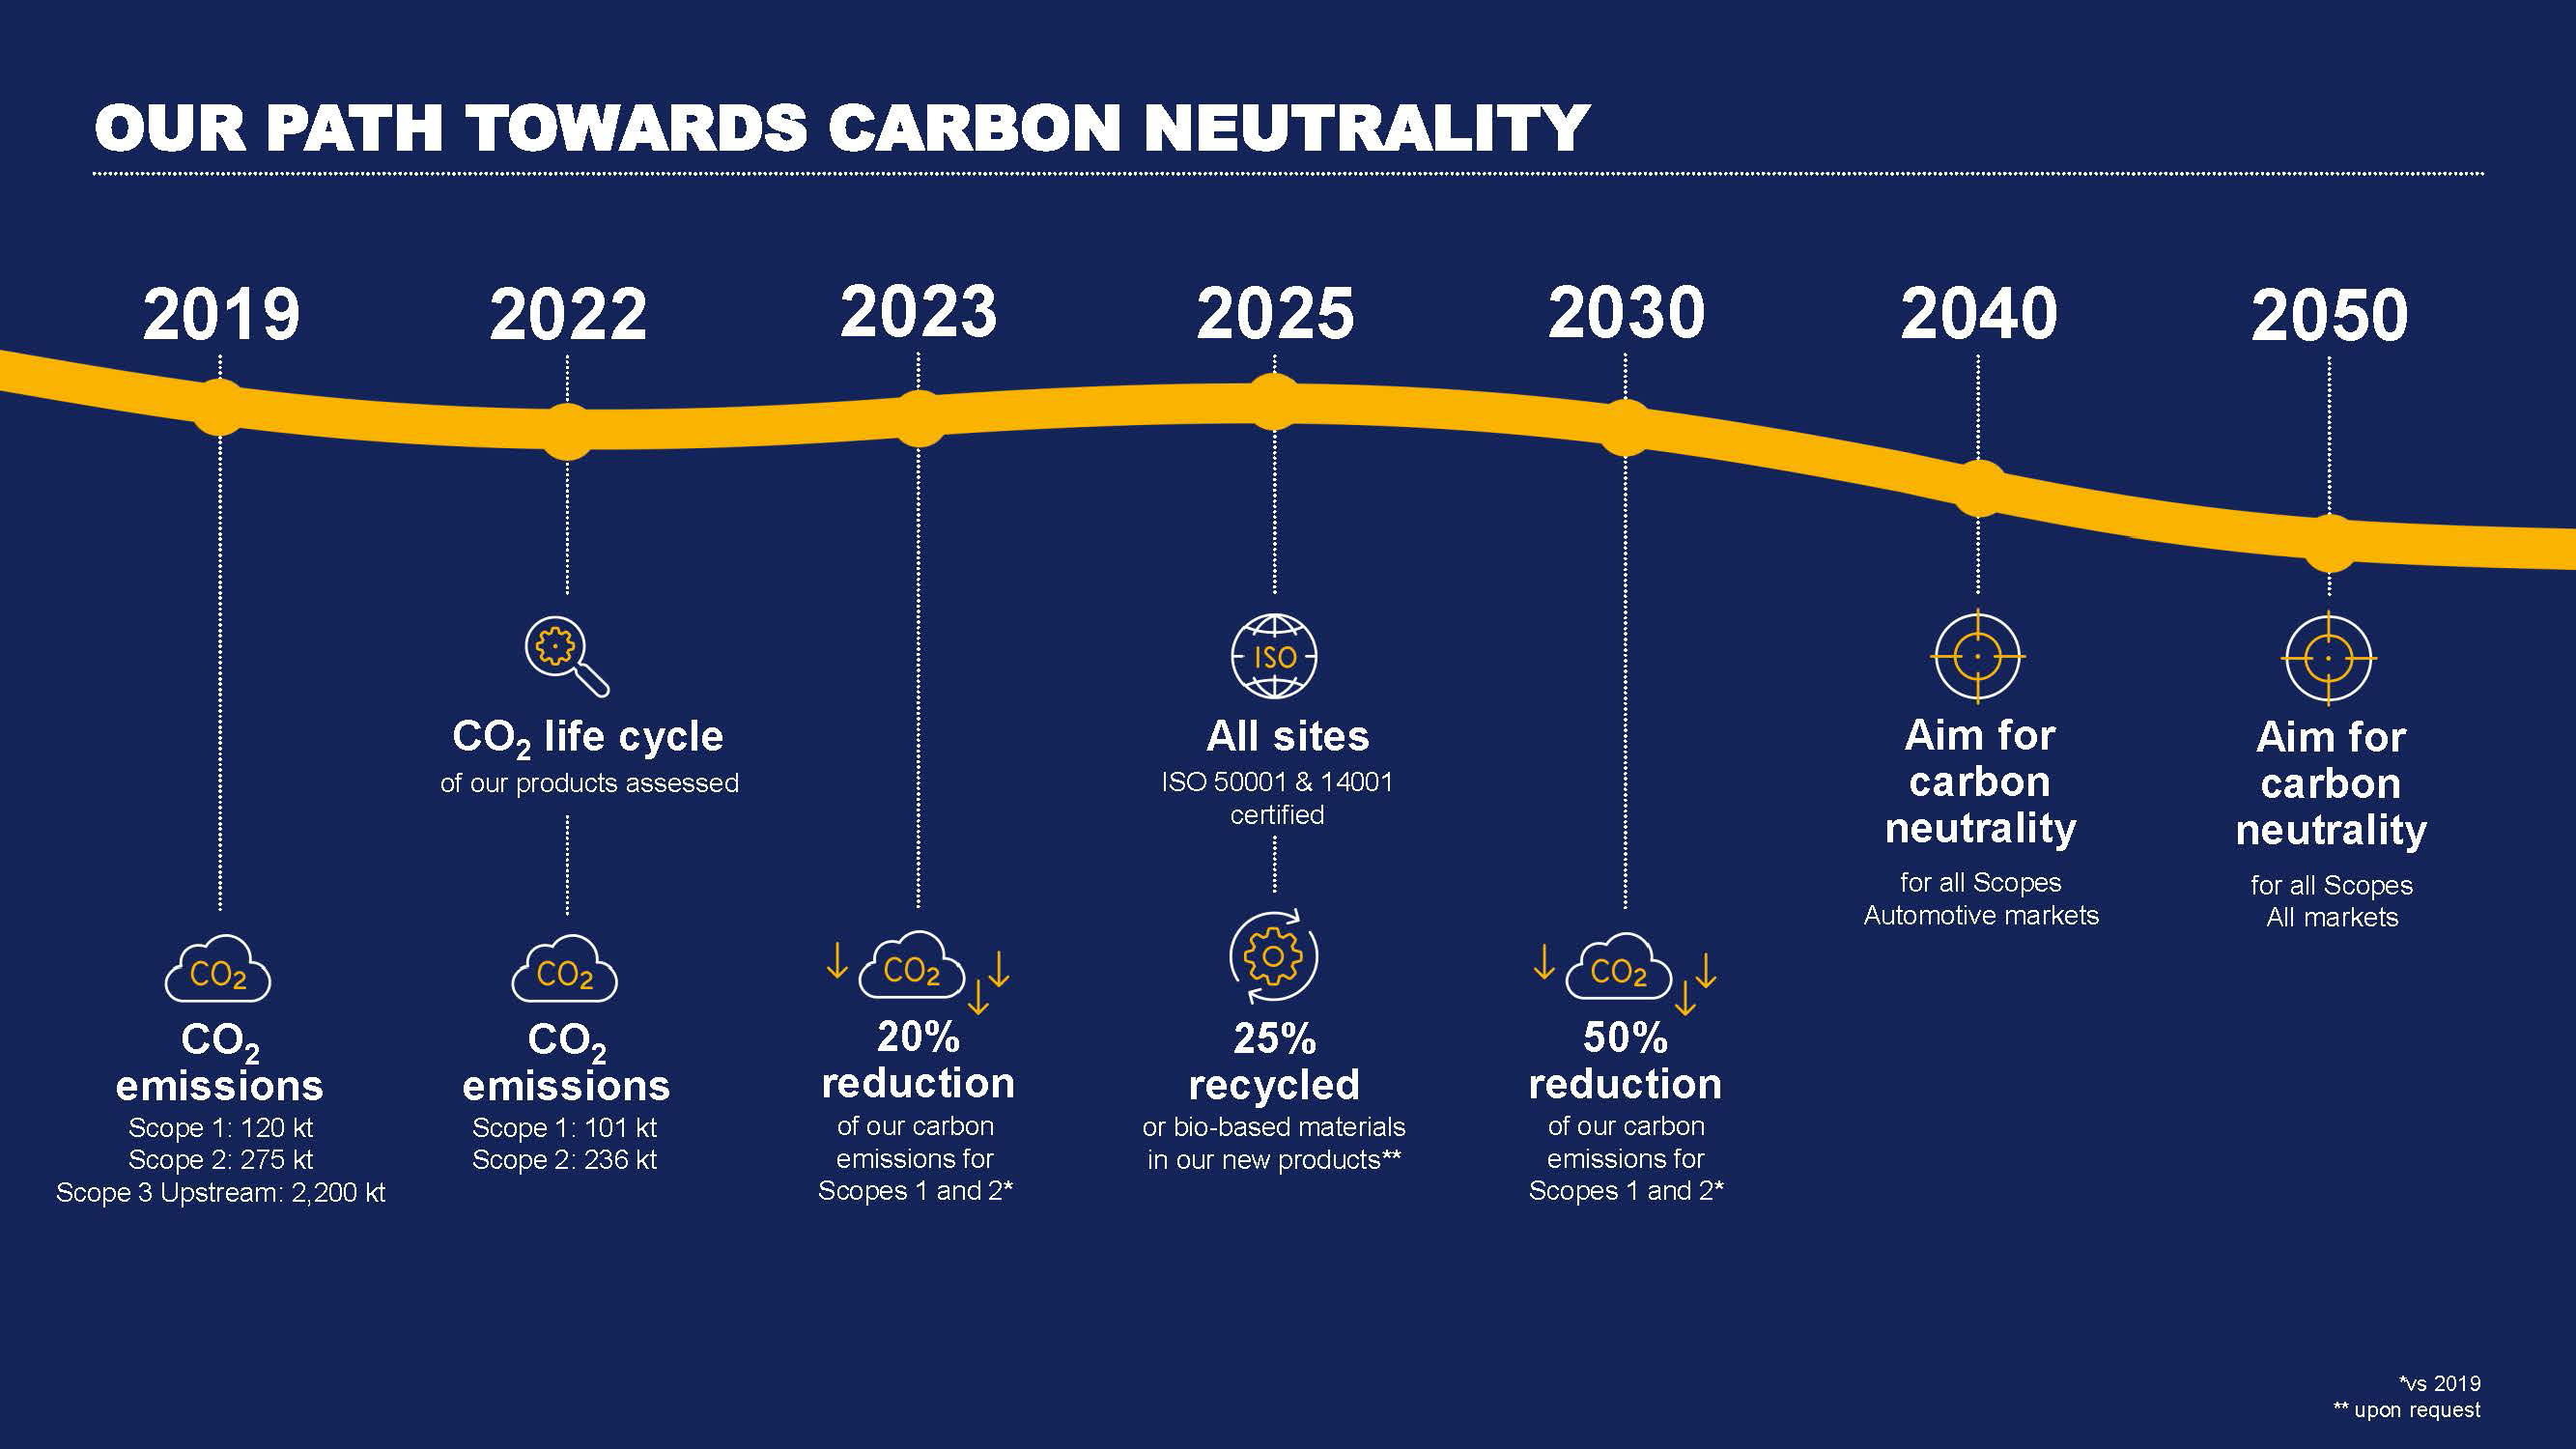 Our path towards carbon neutrality